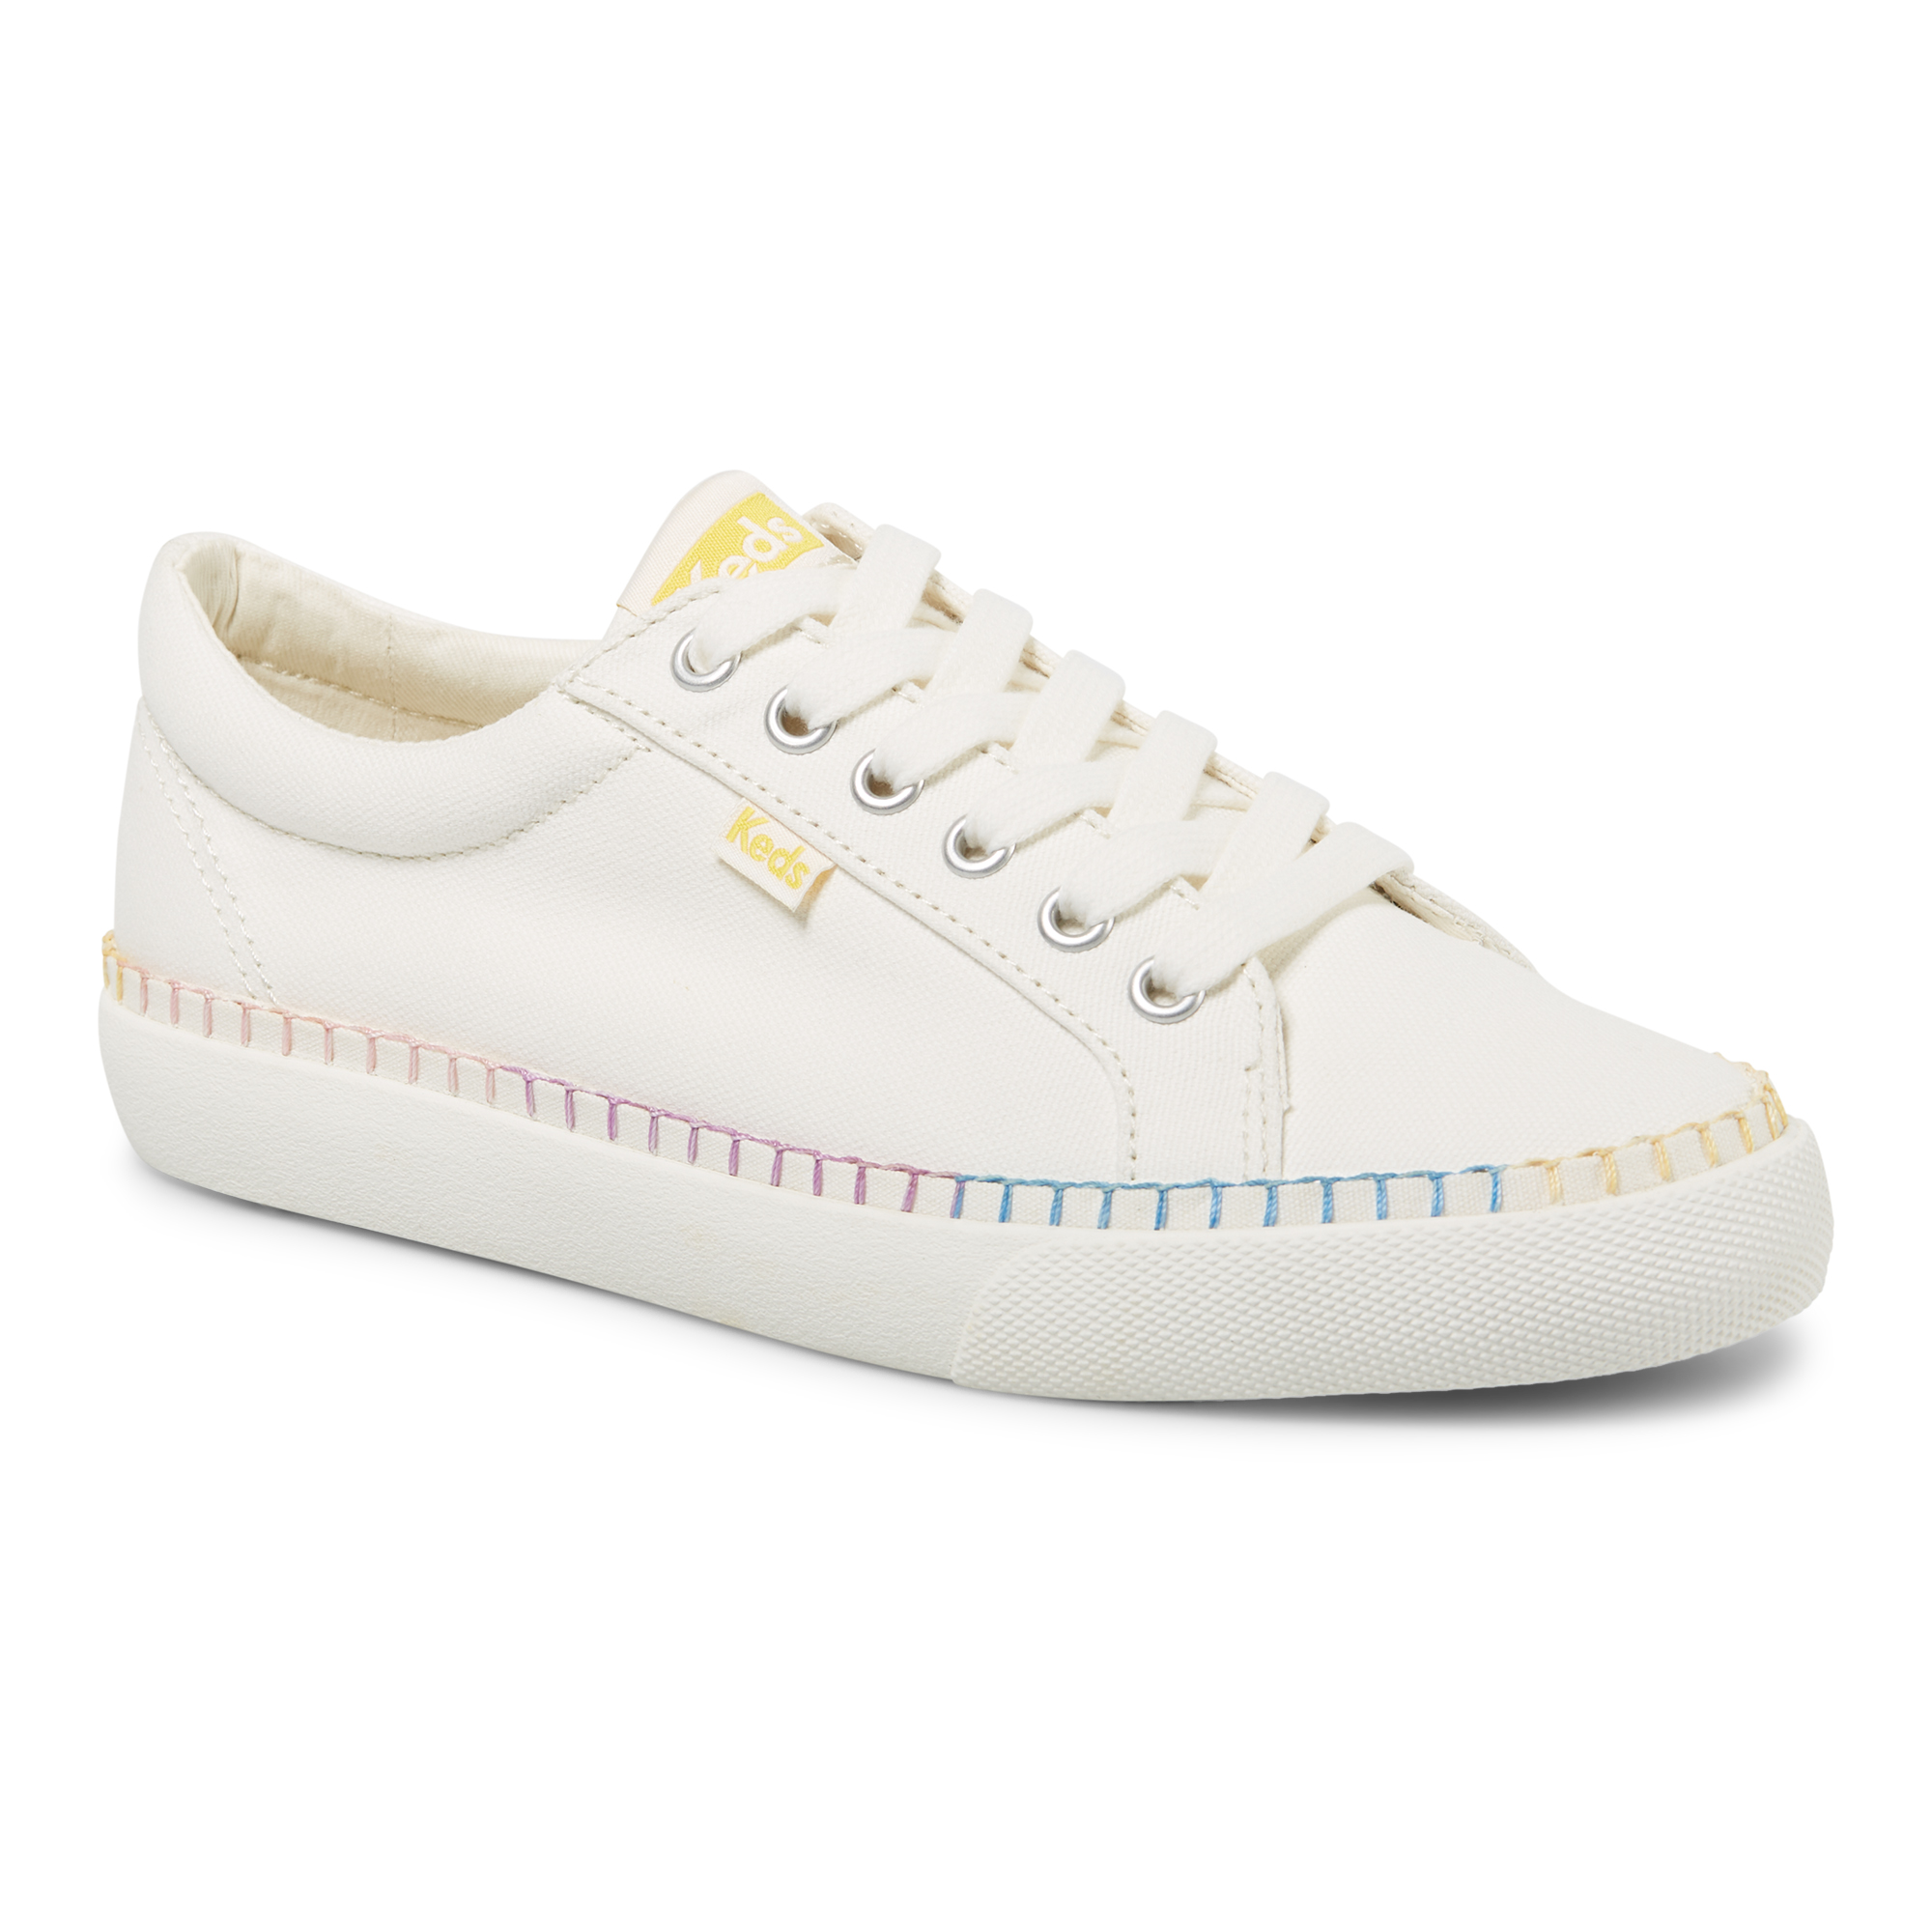 Giày Thể Thao Keds Nữ- Jump Kick Whipstitch Foxing Canvas Cream- KD066305